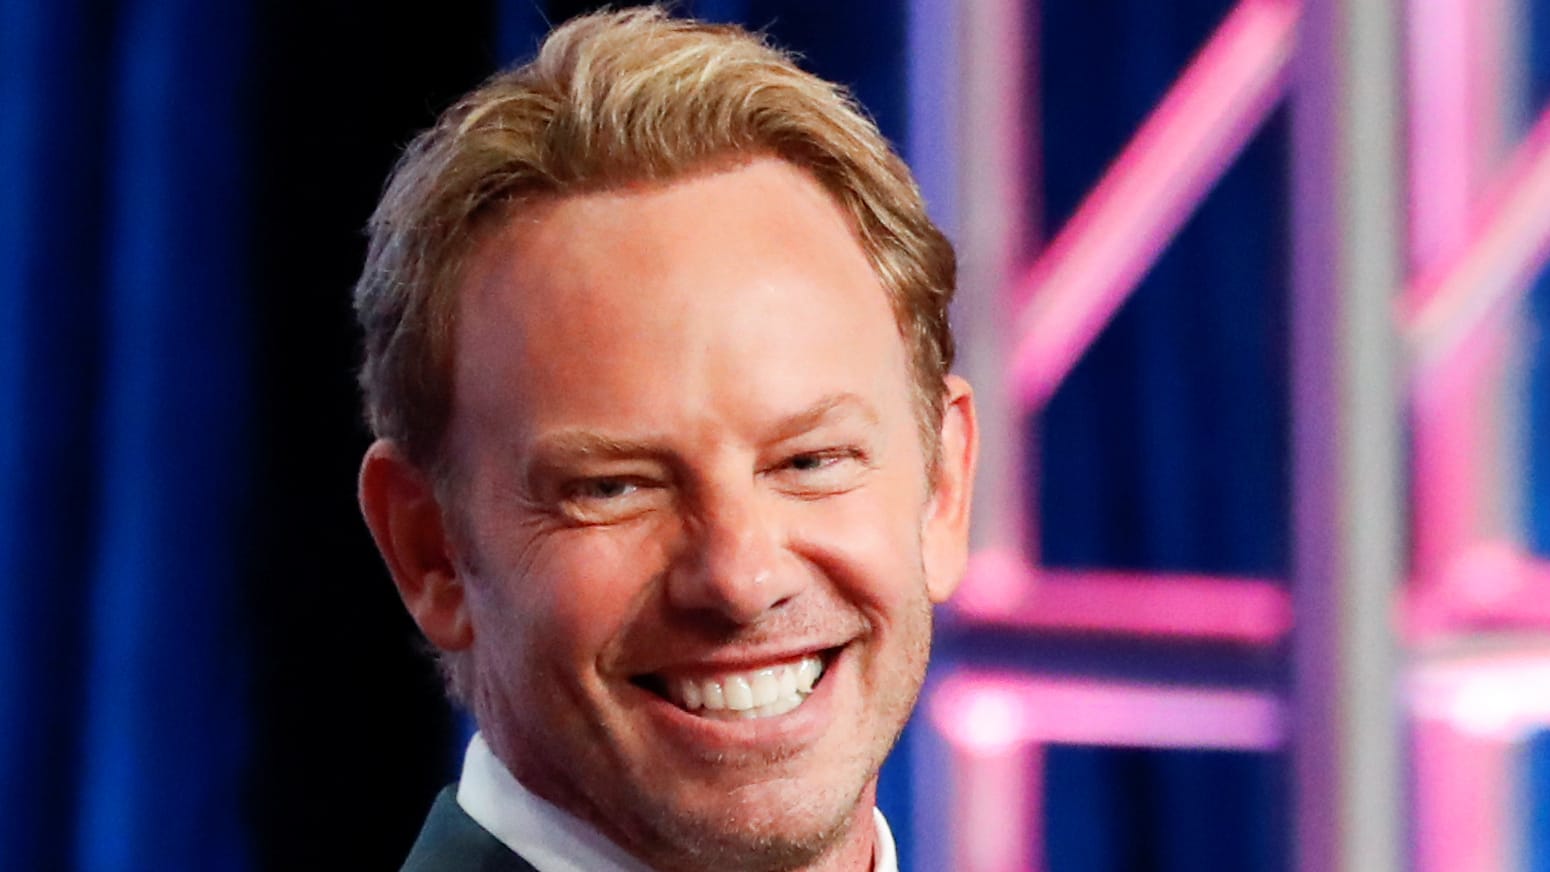 Ian Ziering smiles during a panel for the Fox television series “BH90210” at the Summer TCA (Television Critics Association) Press Tour in Beverly Hills, California, U.S., August 7, 2019. 